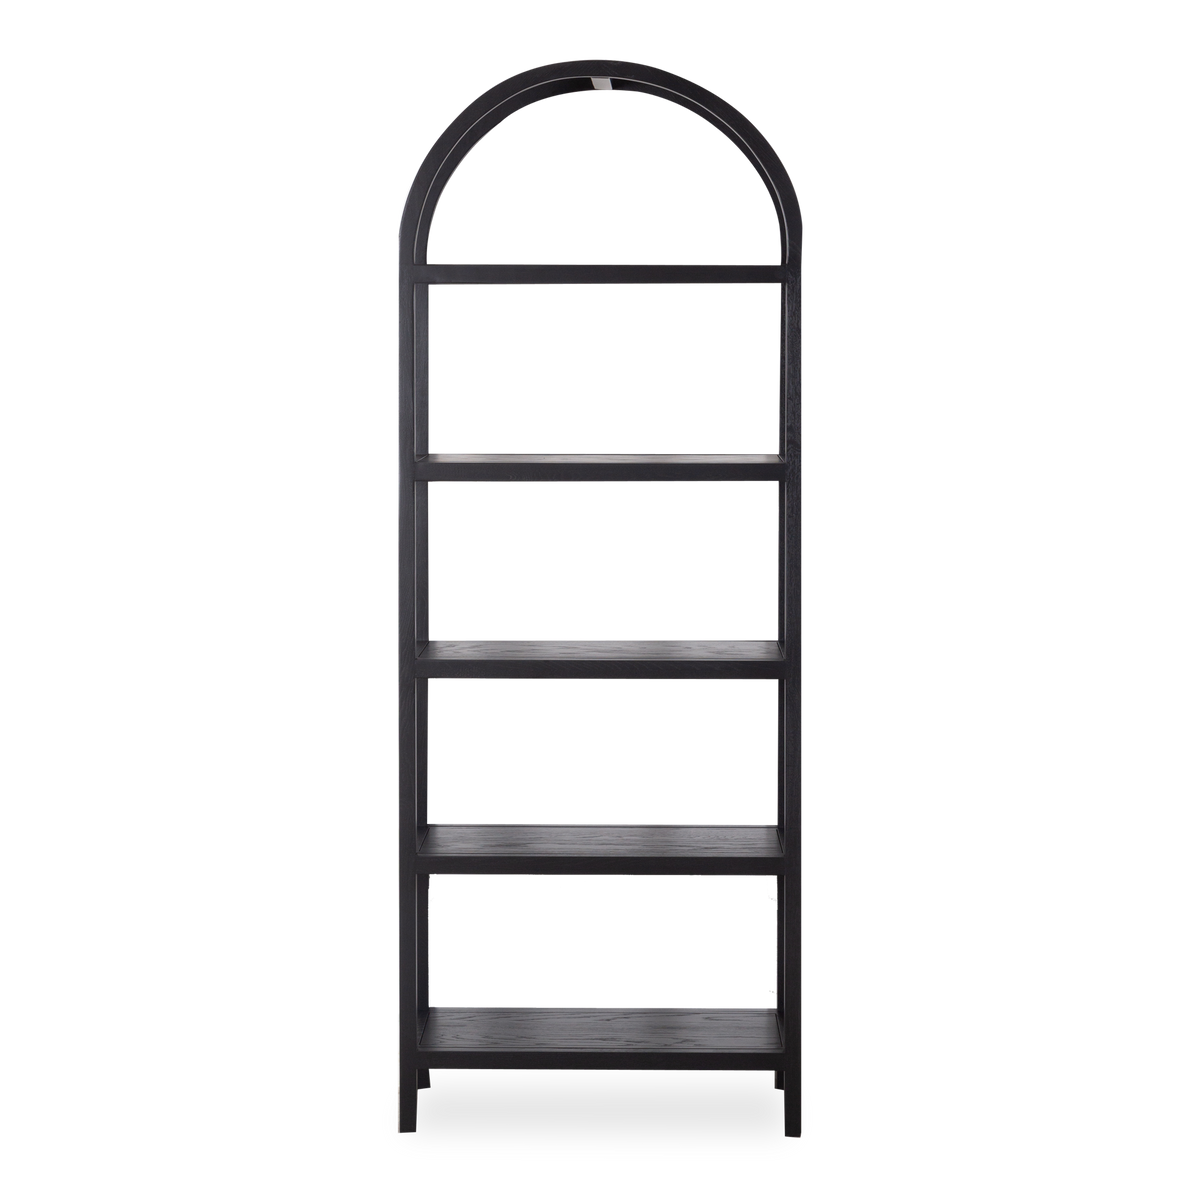 Blackened oak forms a tall, clean frame in the Harrow Bookcase.